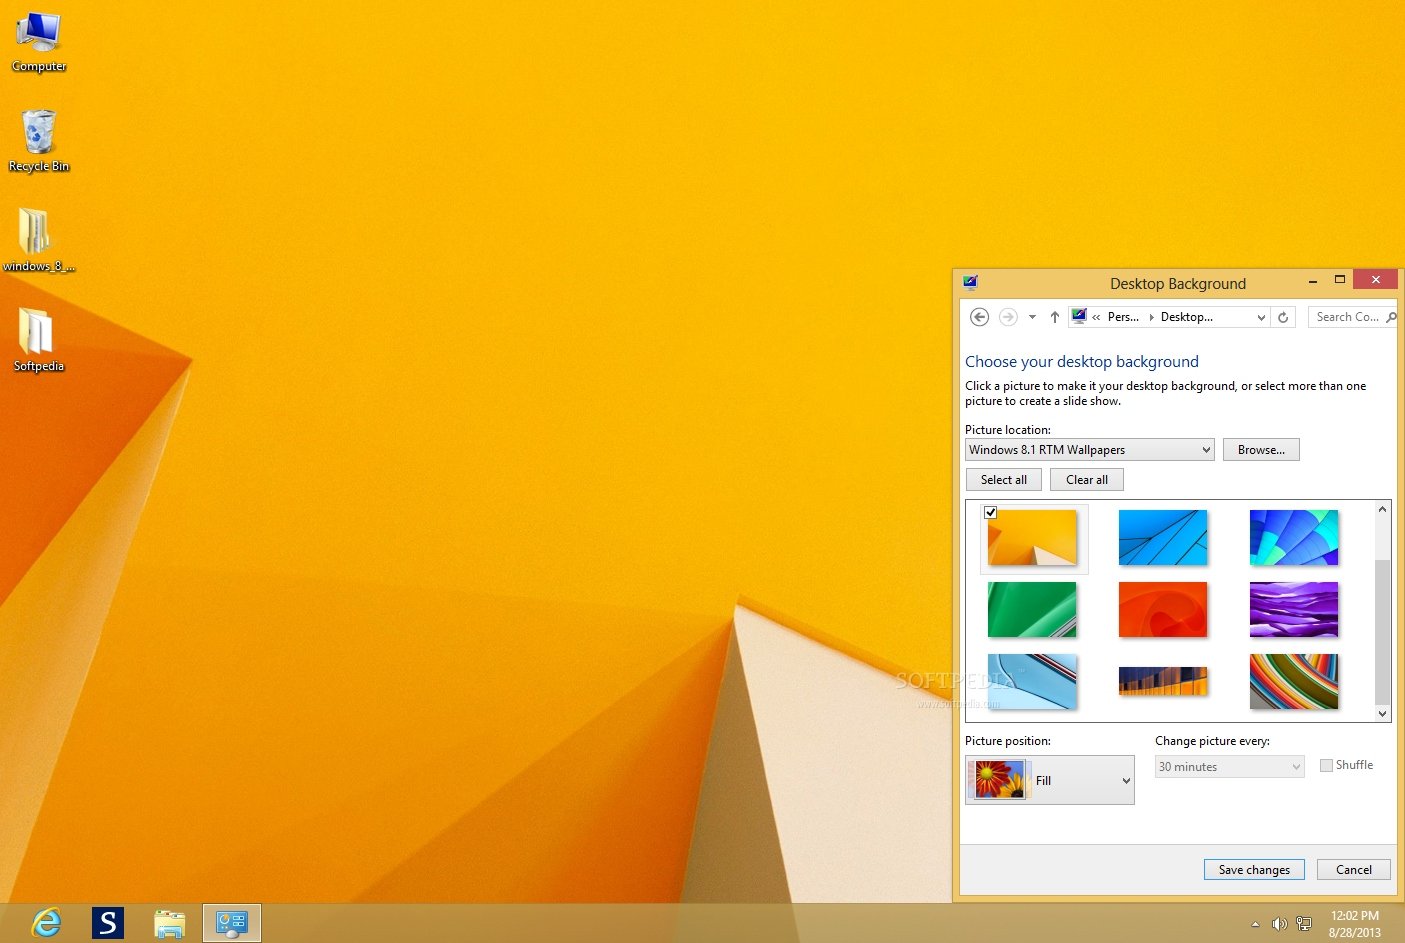 Windows 81 RTM Wallpapers   Users can explore all the desktop